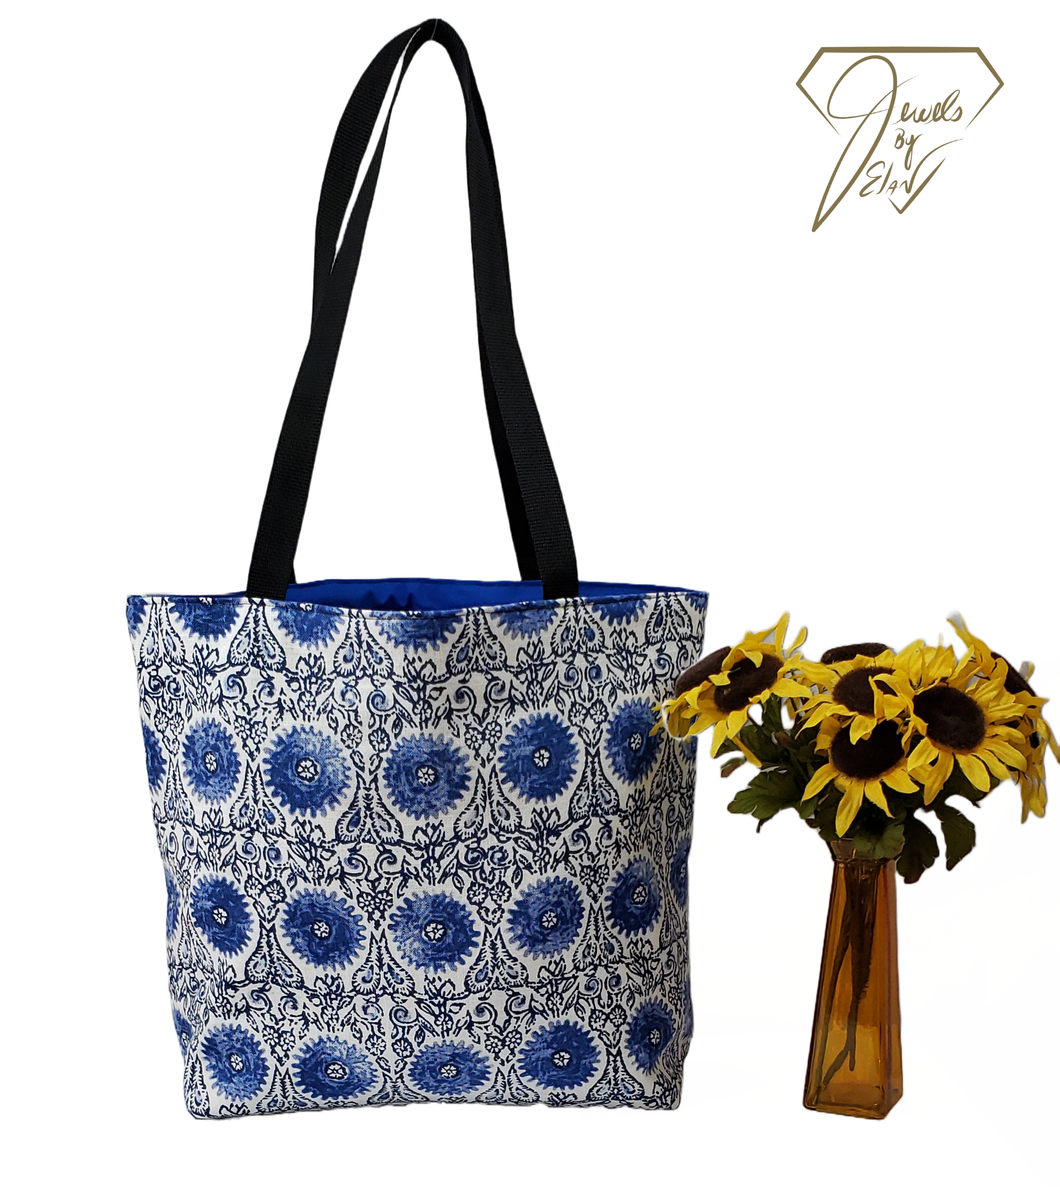 Handcrafted Blue Floral Print Tote Bag